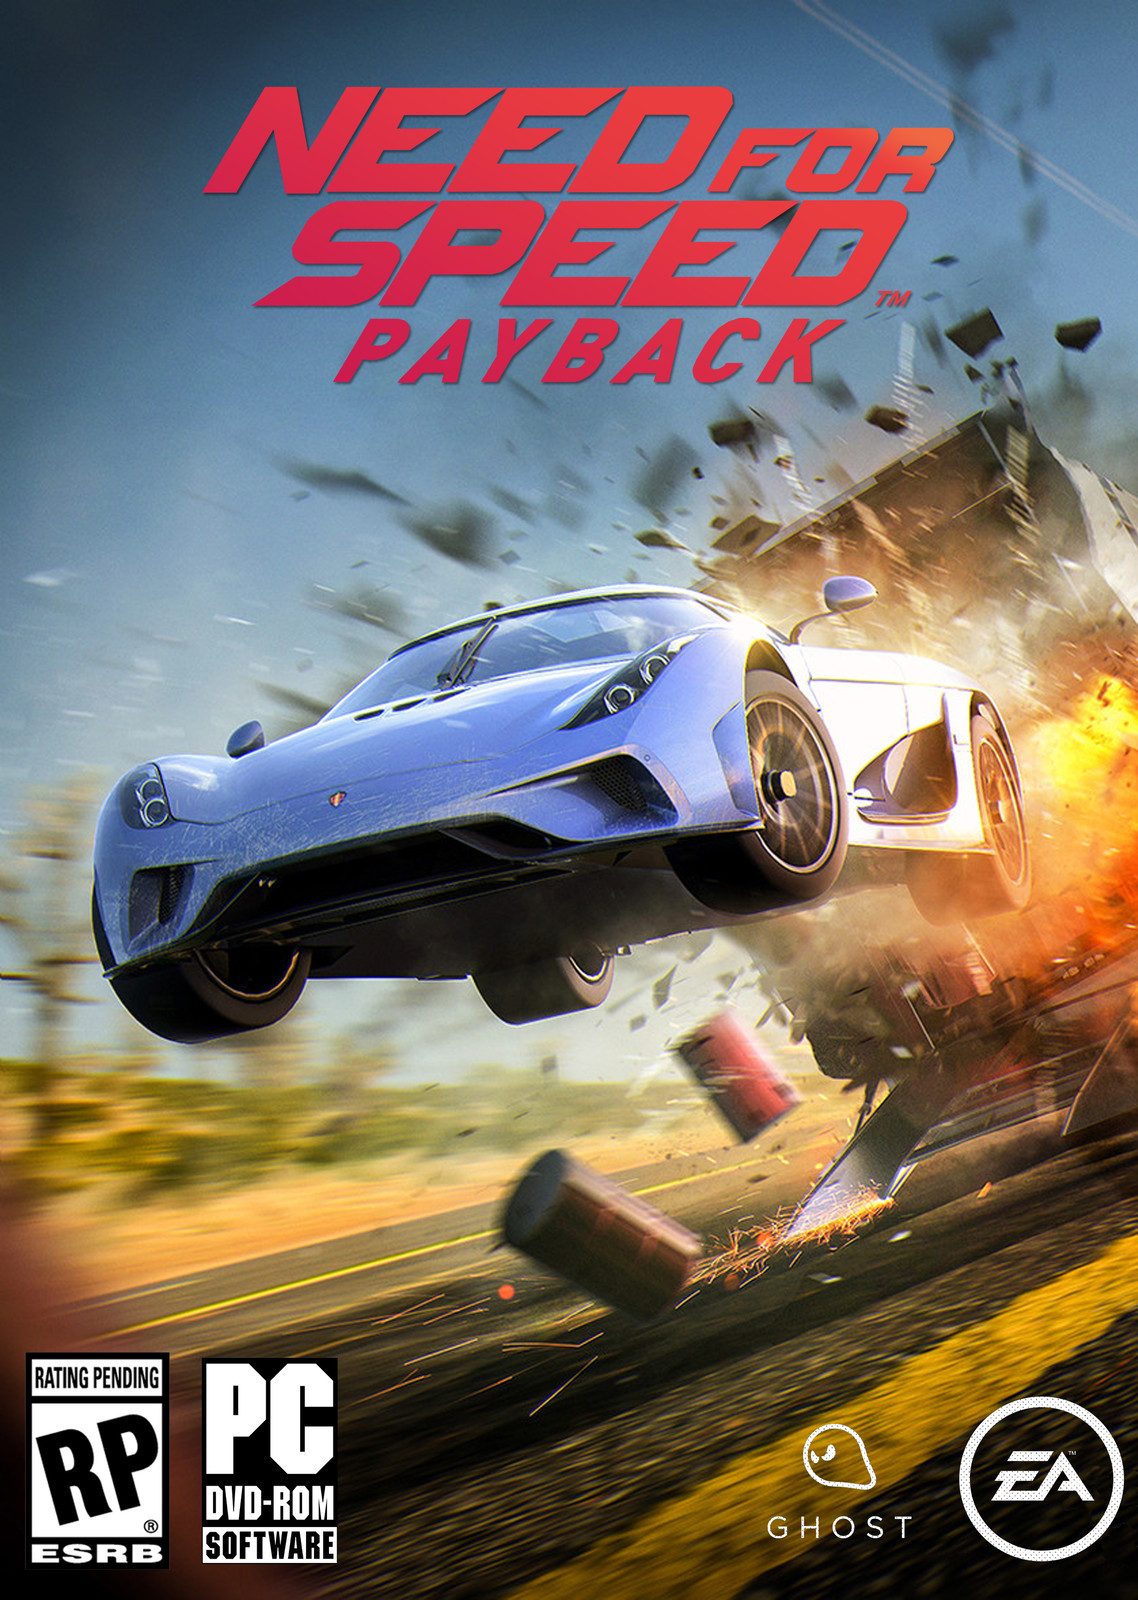 Need for Speed Payback Alternative Cover (Based on Khyzyl Key-Art for the game)